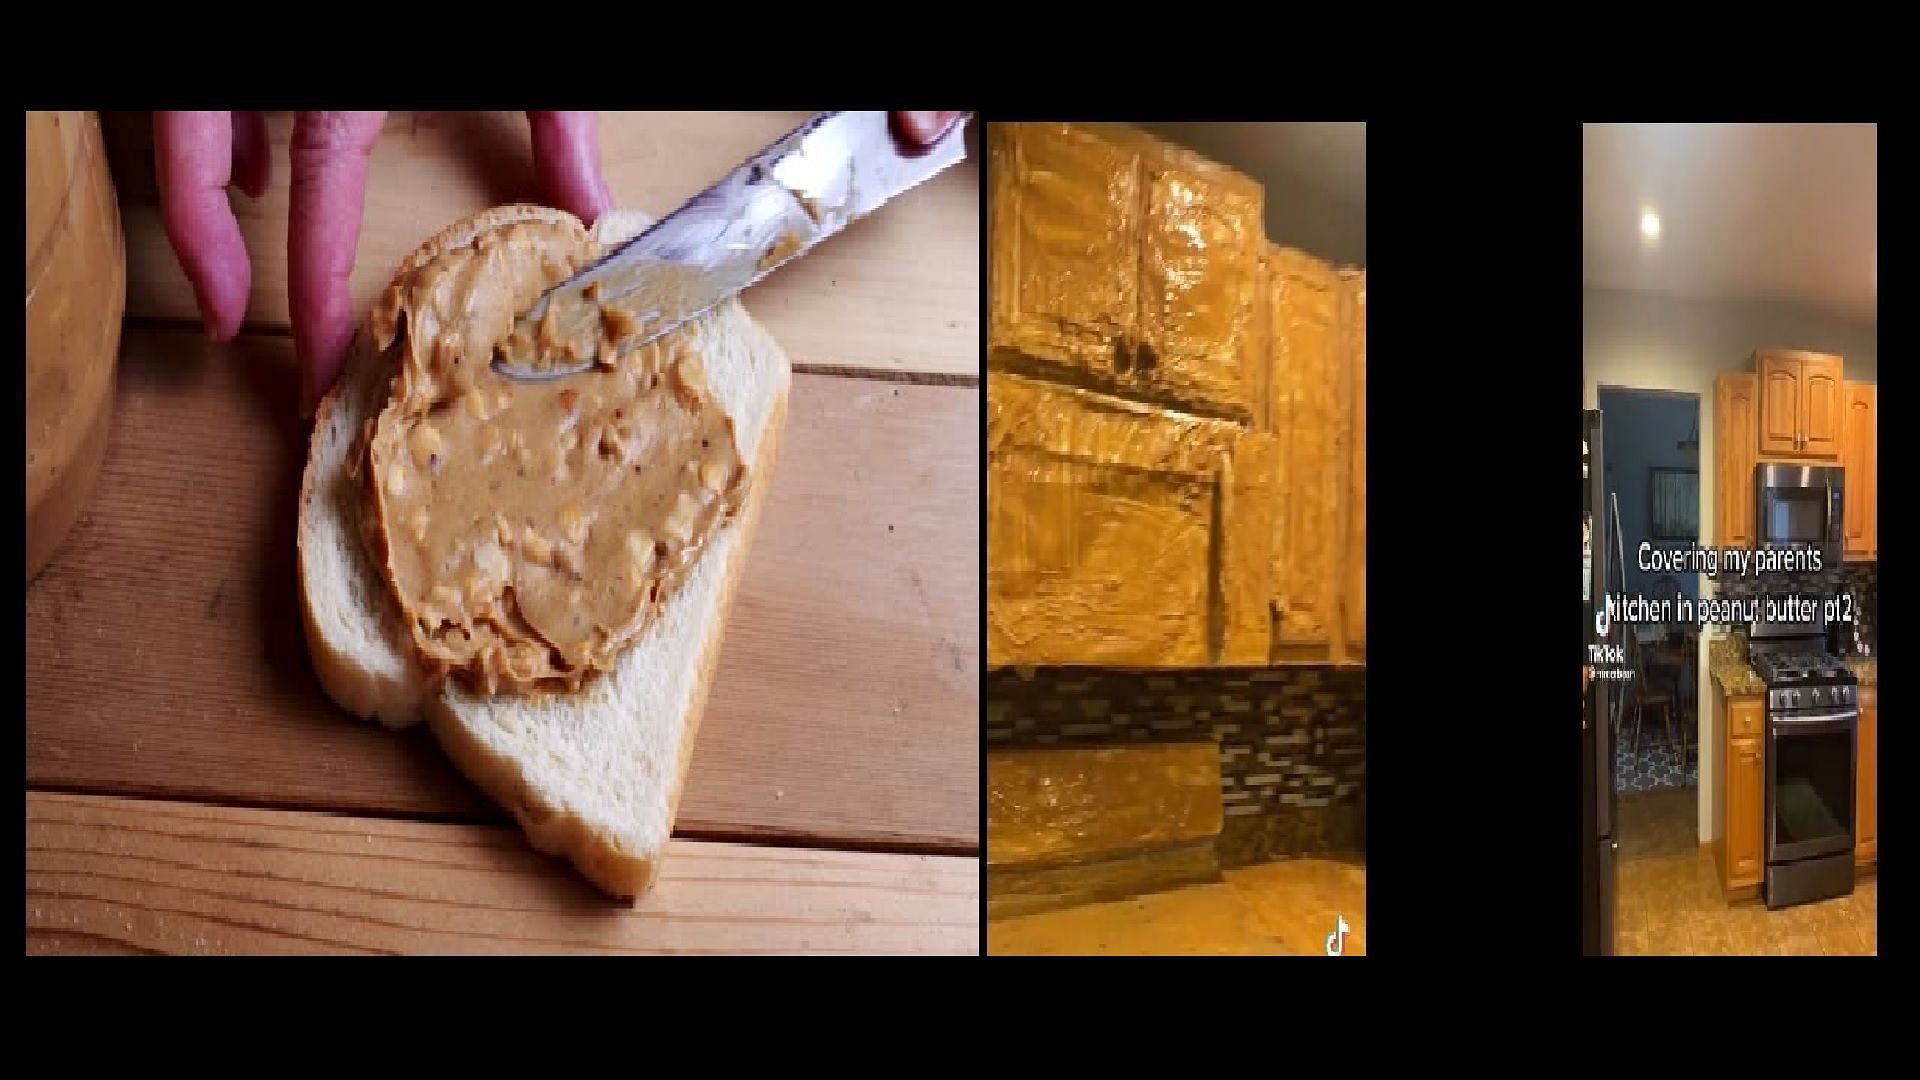 Peanut butter kitchen prank goes viral on the internet (Image via Getty Images (Left) snip from Twitter (Right)